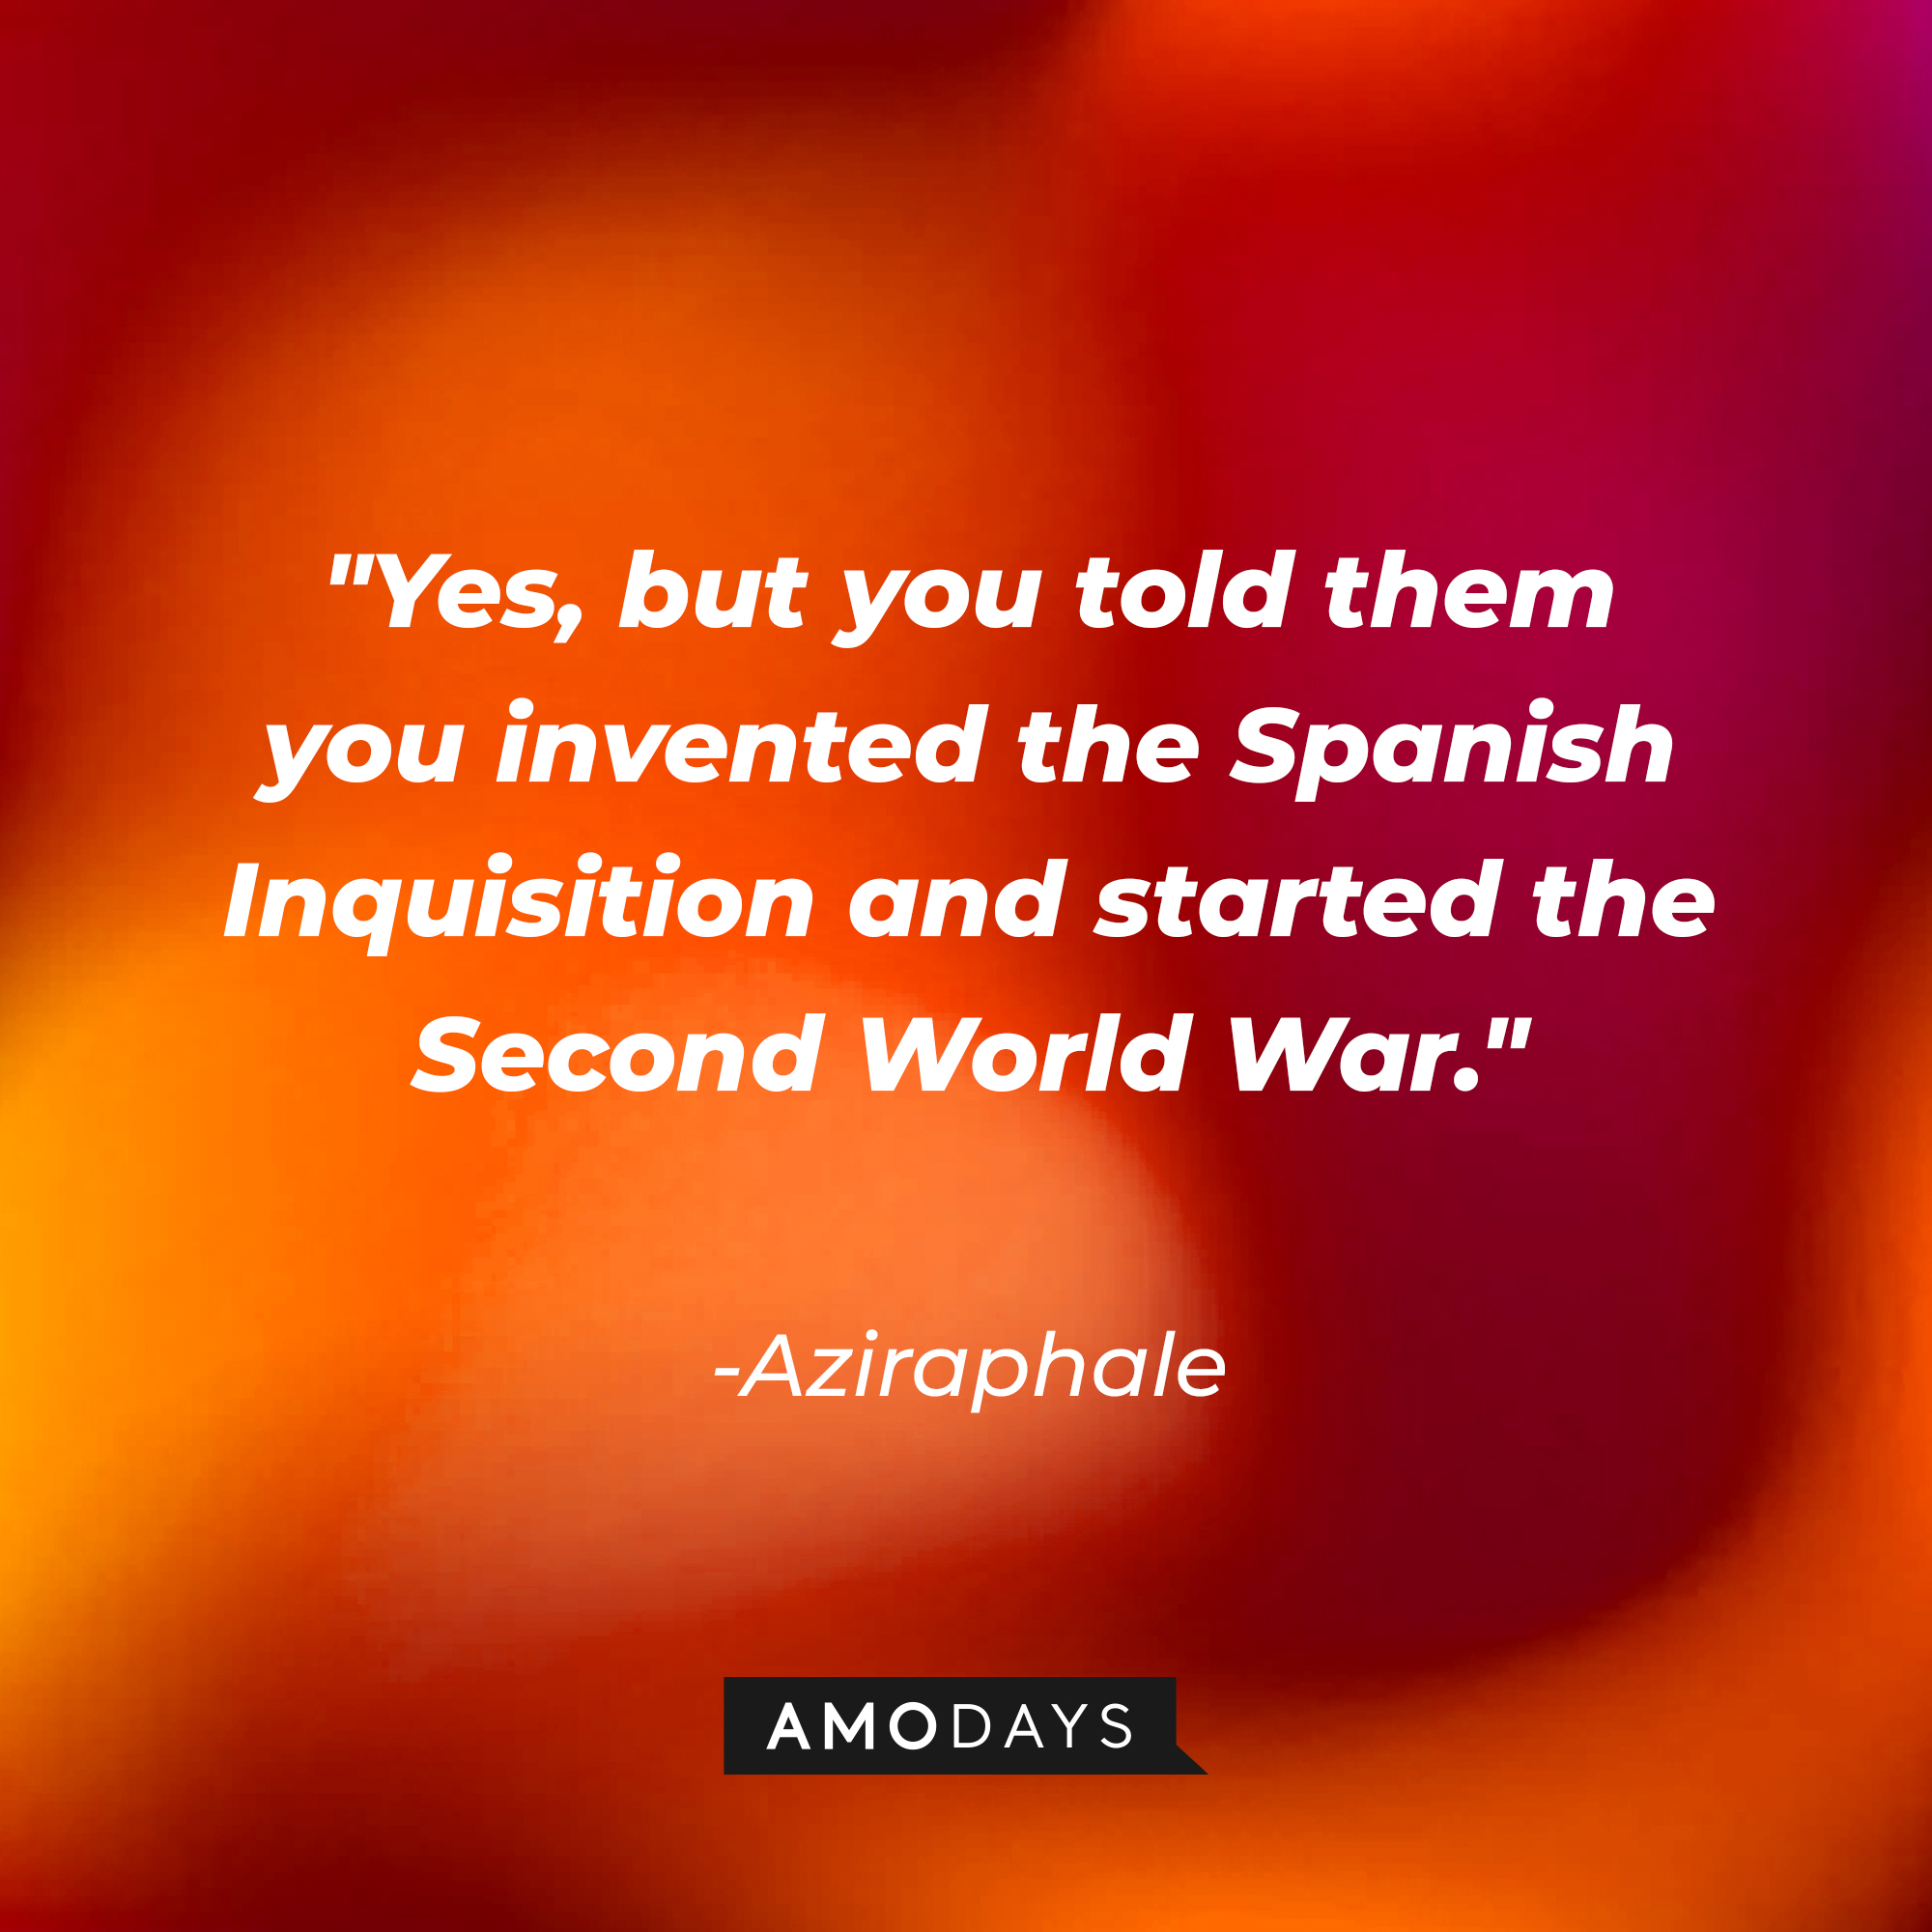 Aziraphale's quote: "Yes, but you told them you invented the Spanish Inquisition and started the Second World War." | Source: AmoDays